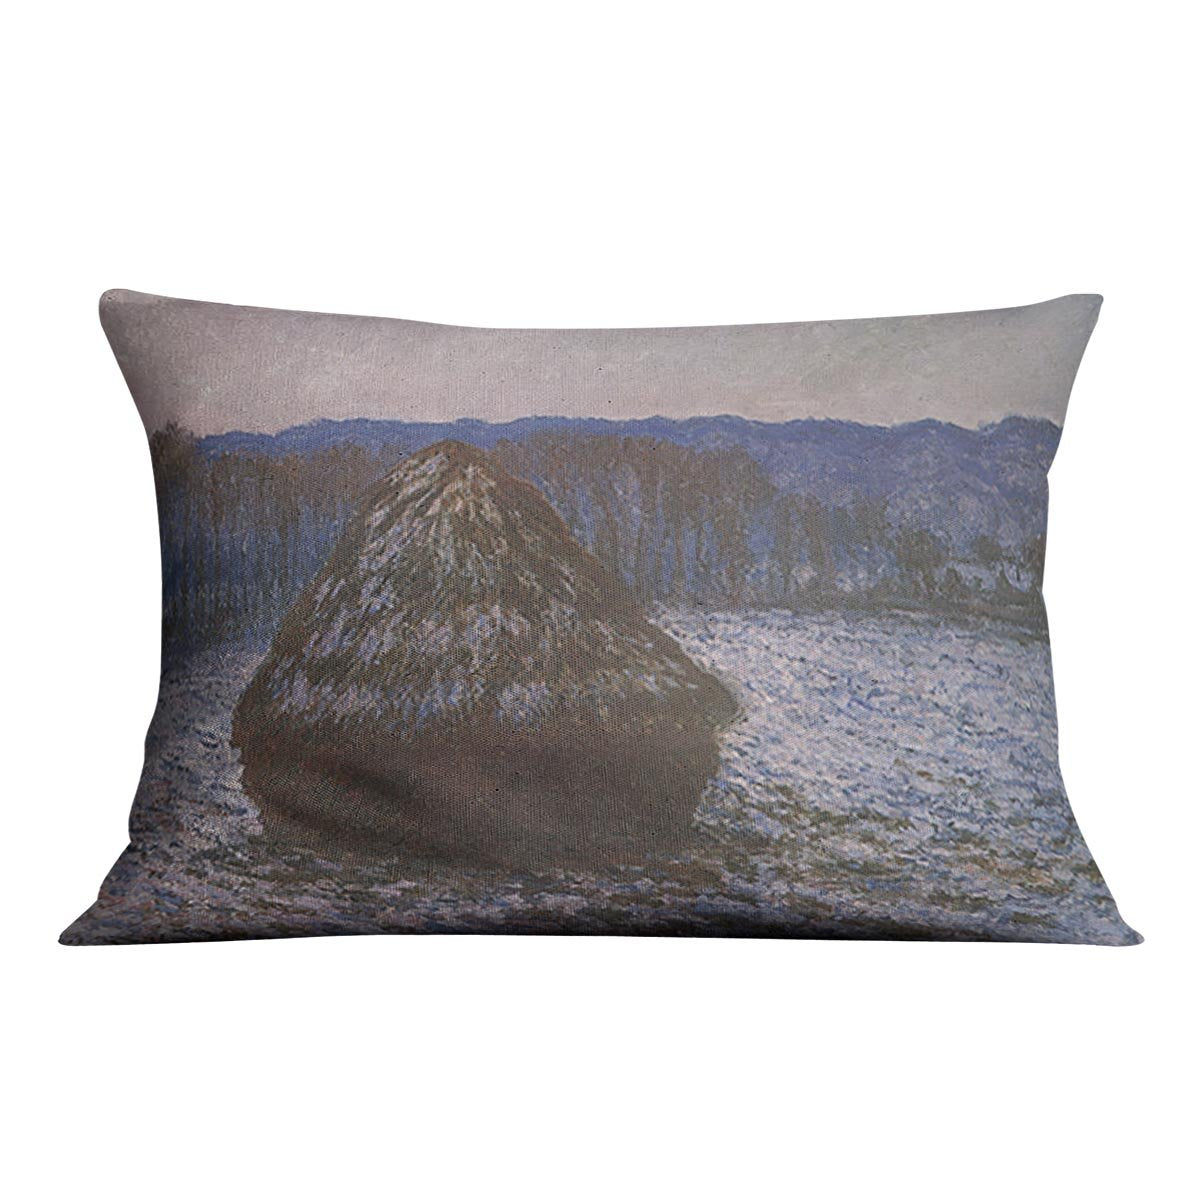 Haystacks 2 by Monet Throw Pillow